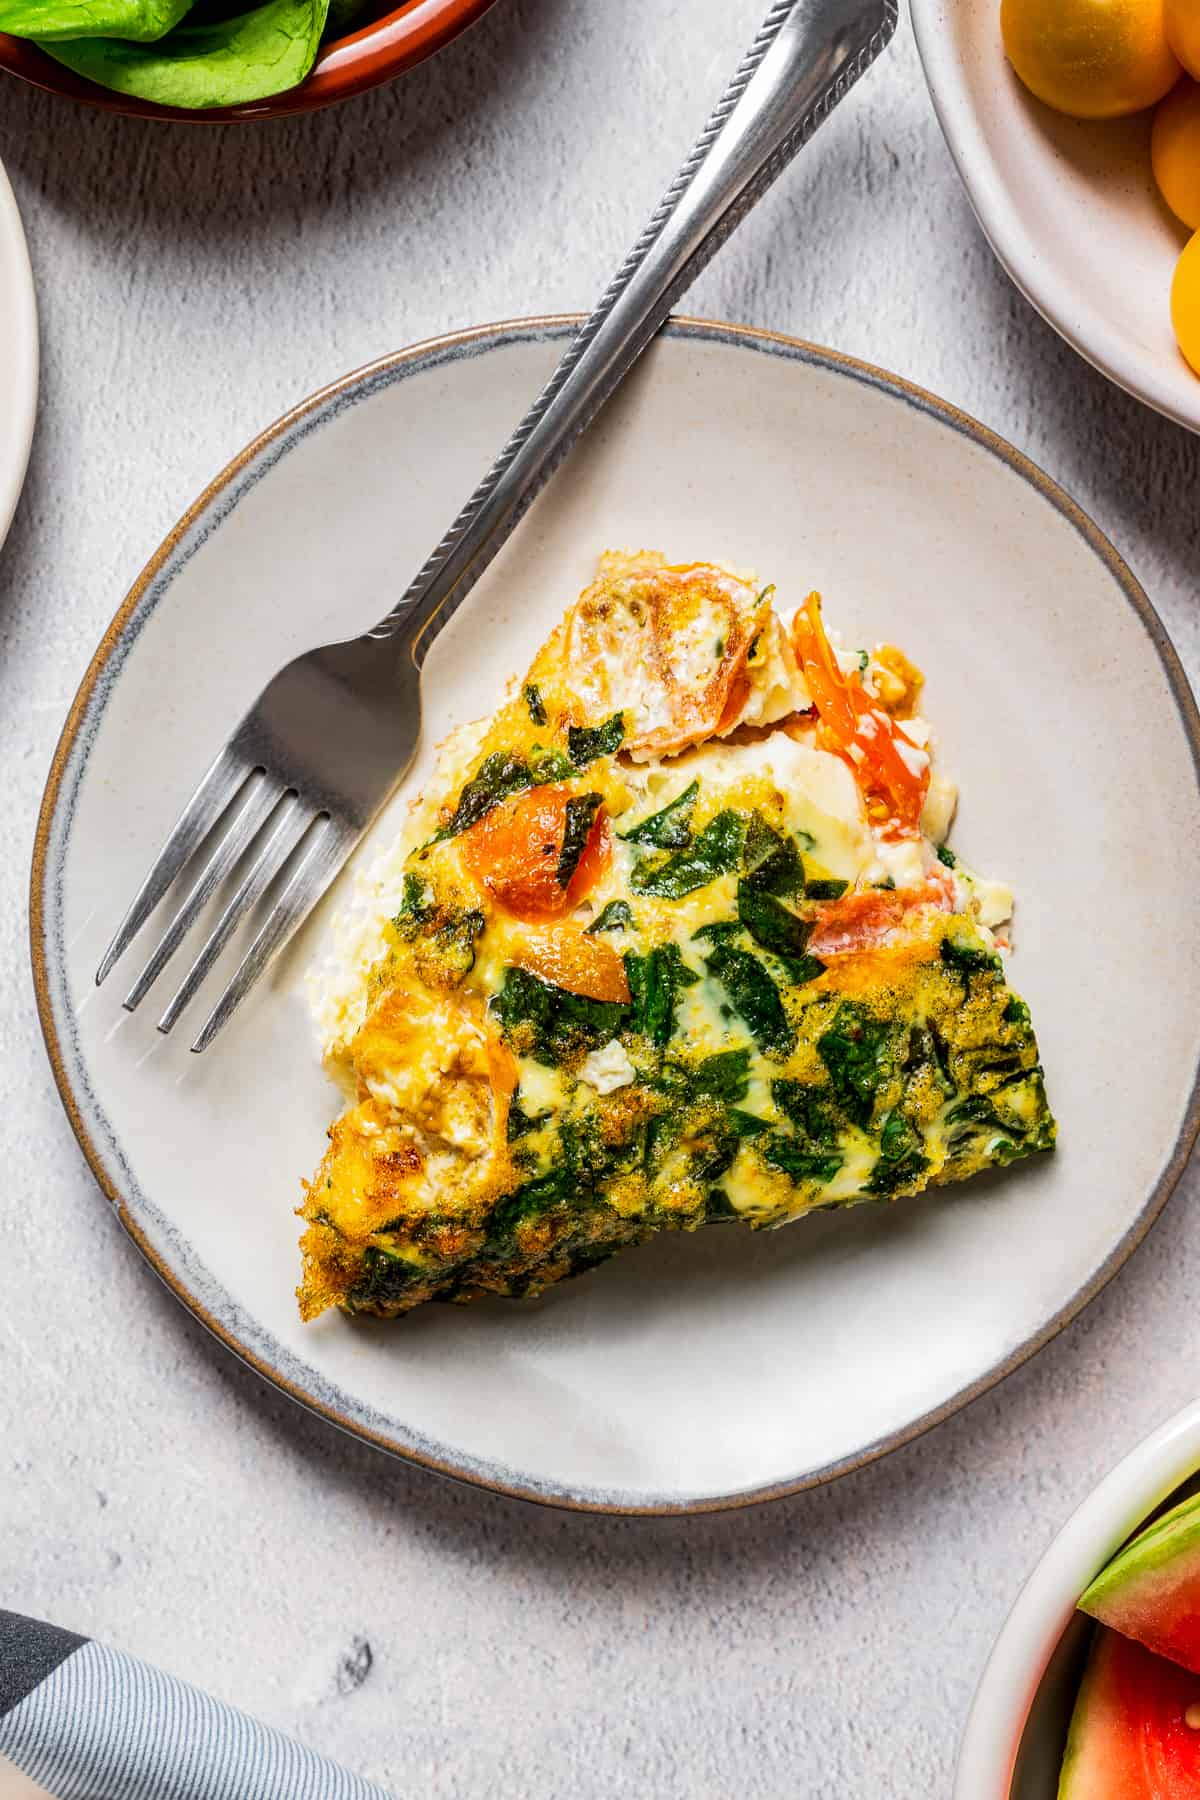 A slice of egg white frittata on a plate with a fork.